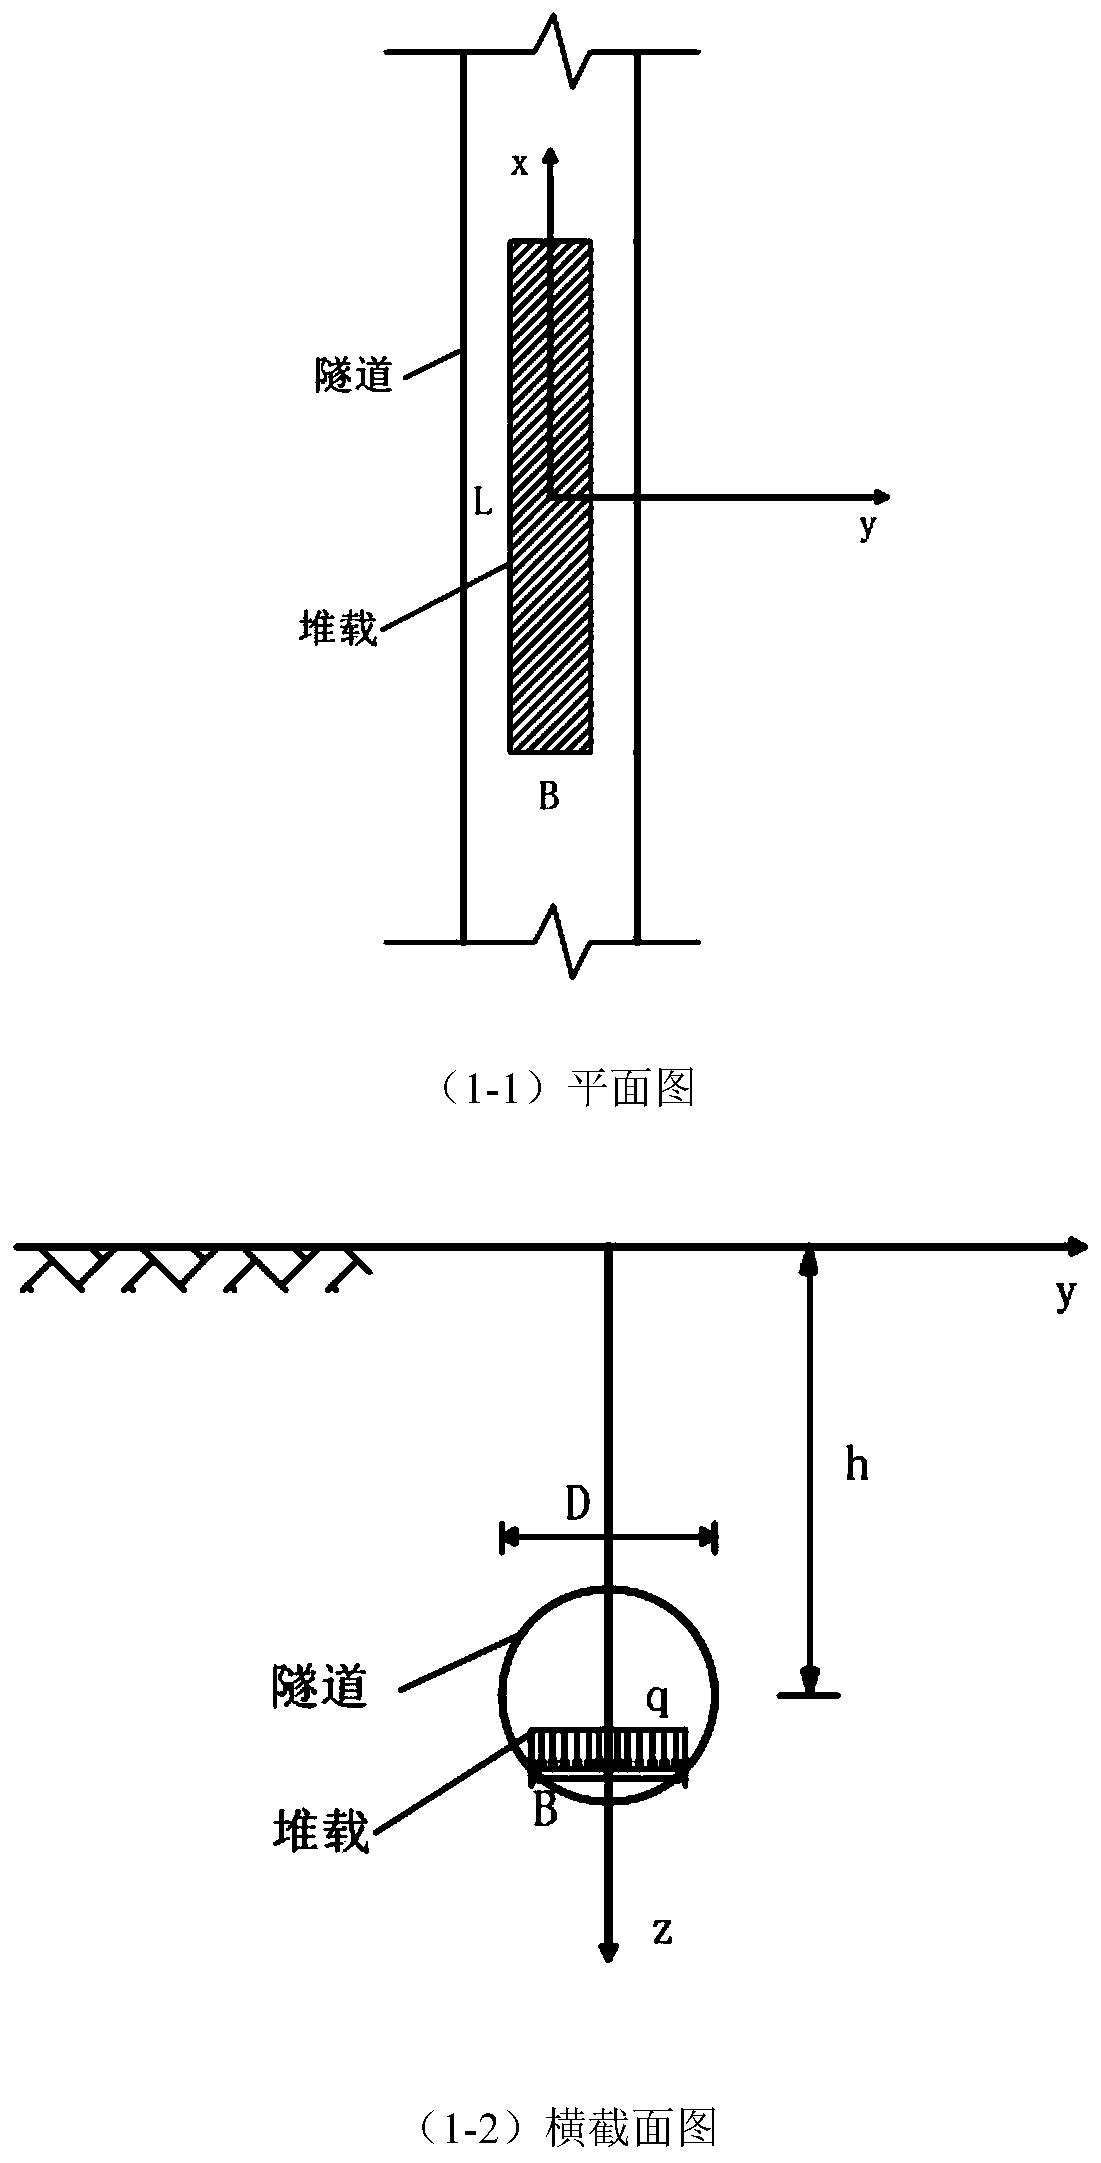 Calculation method for displacement deformation of existing tunnel caused by concentrated loads in tunnel